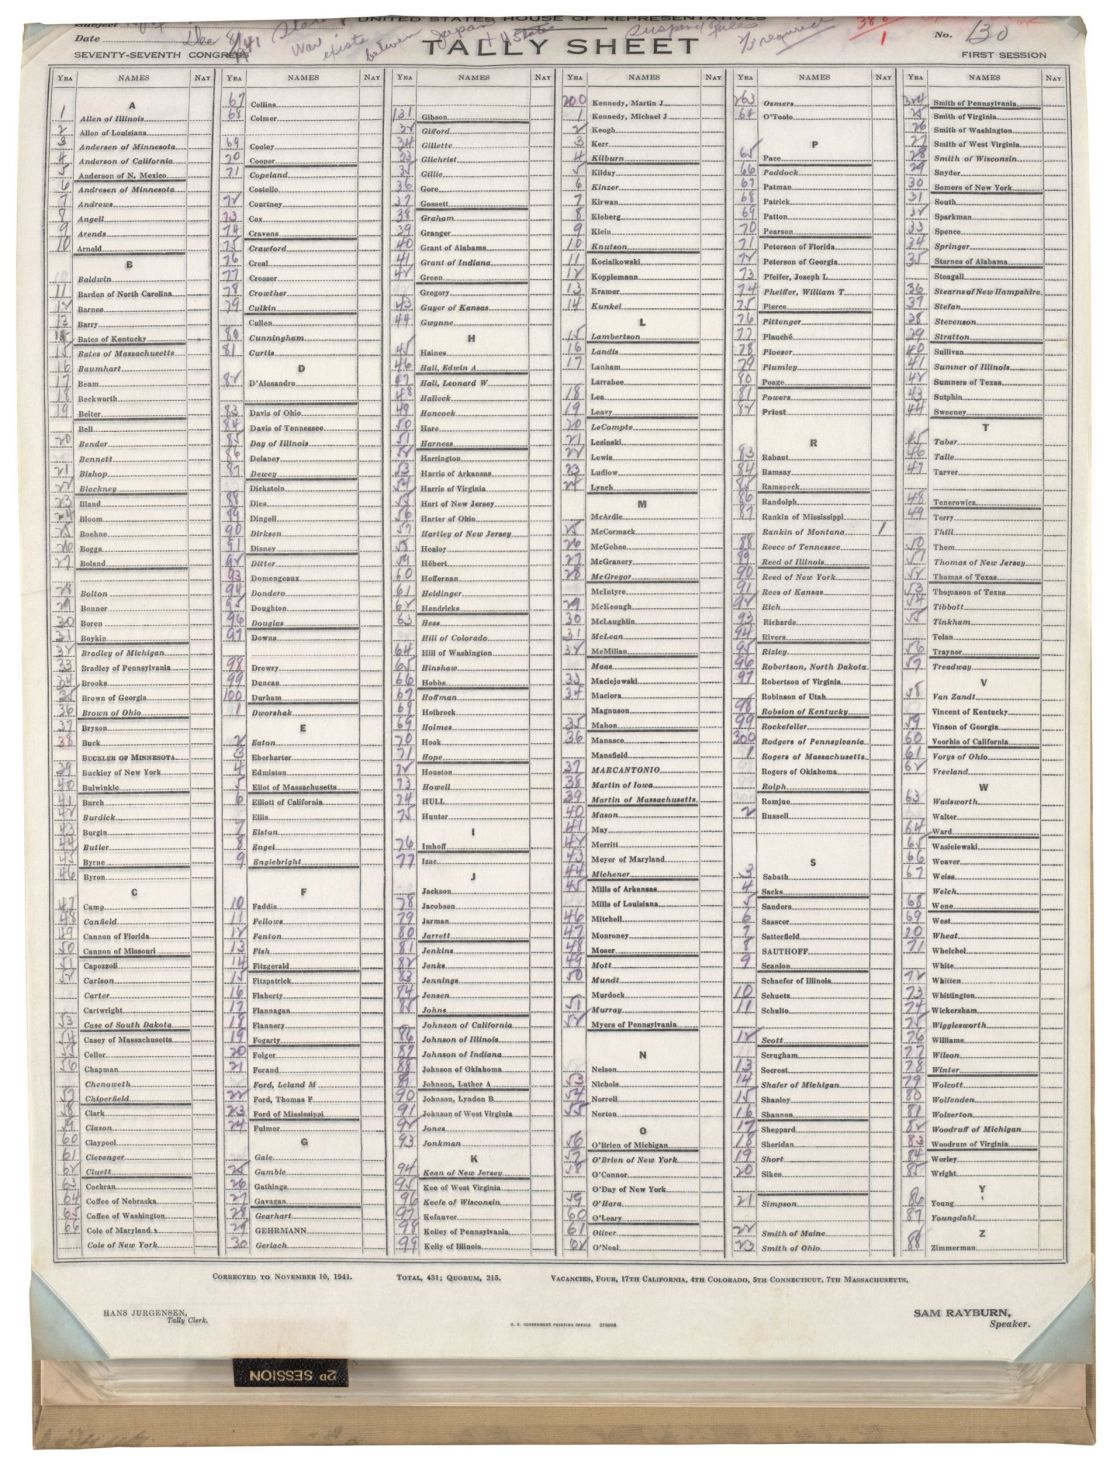 Tally sheet of the vote in the House of Representatives for a declaration of war against Japan, December 8, 1941. 